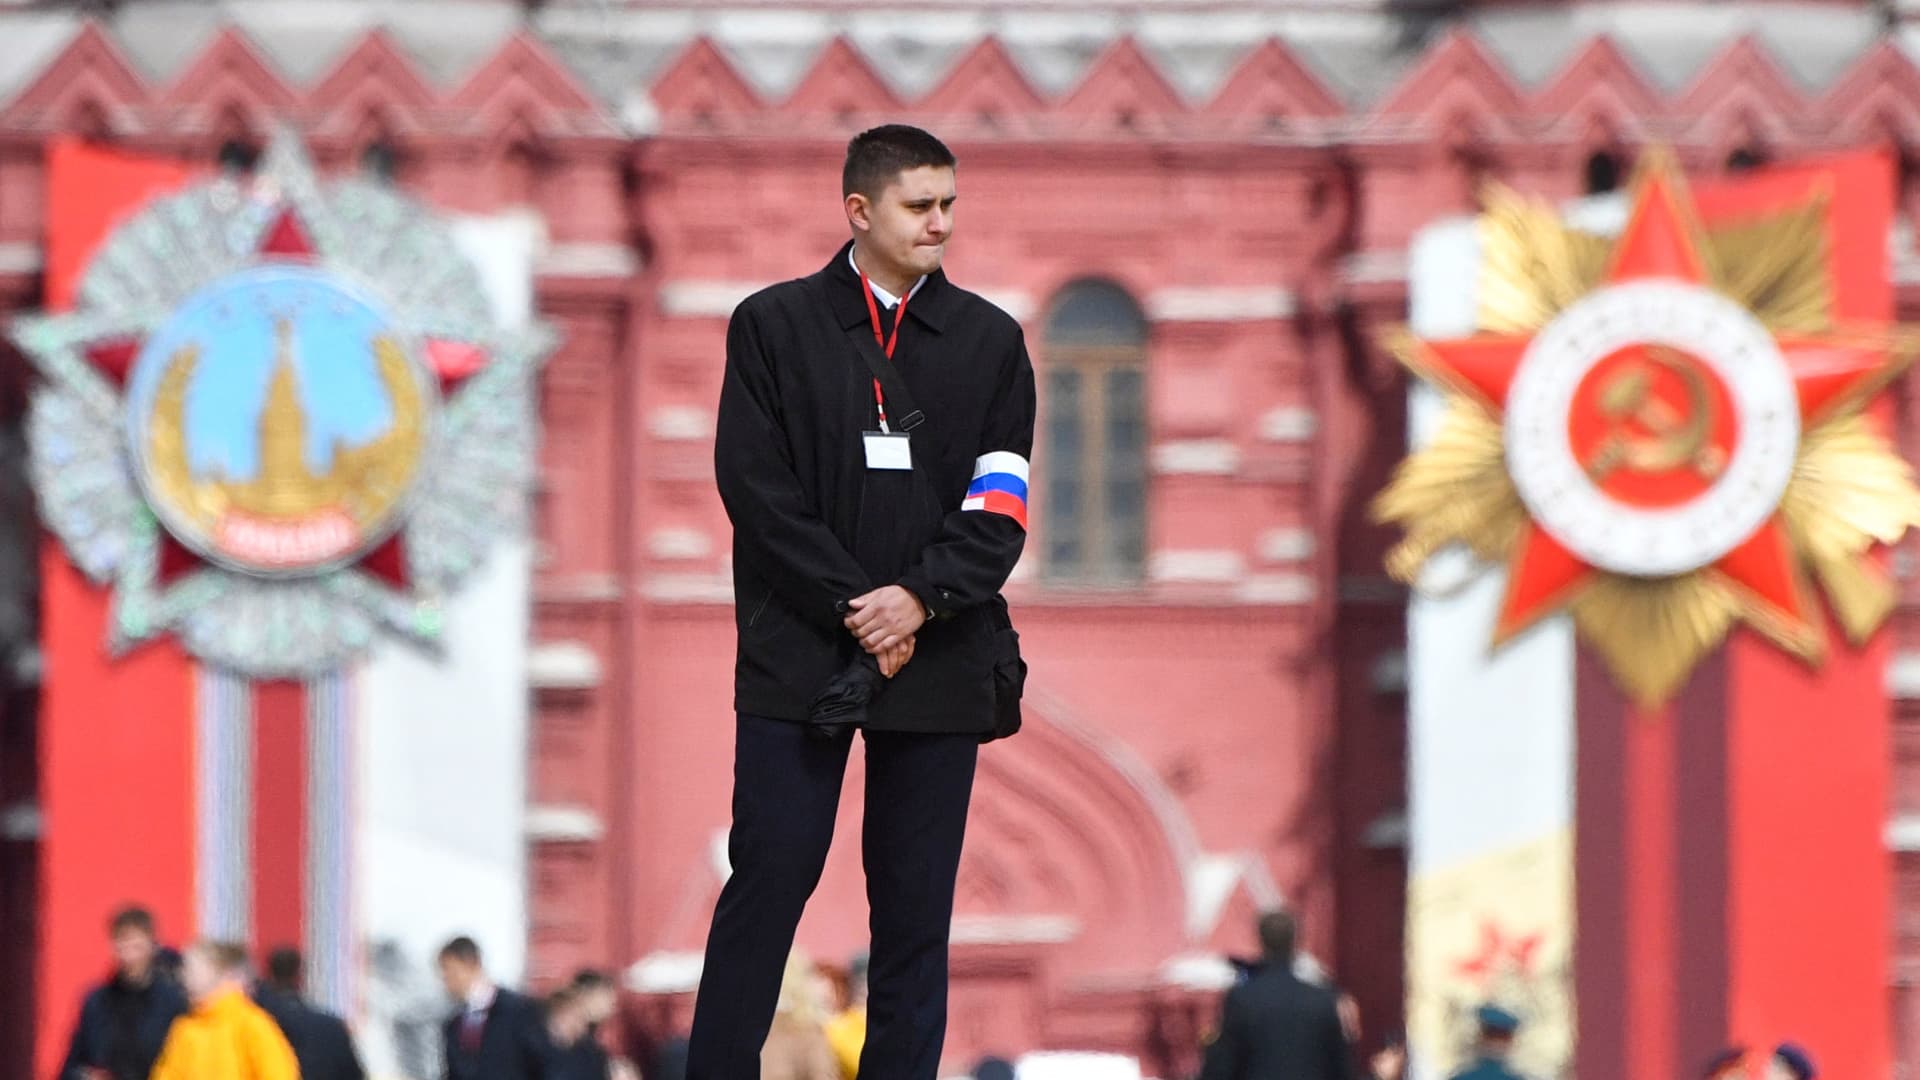 A security guard stands on Red Square prior to the Victory Day military parade in central Moscow on May 9, 2022. Russia celebrates the 77th anniversary of the victory over Nazi Germany during World War II.